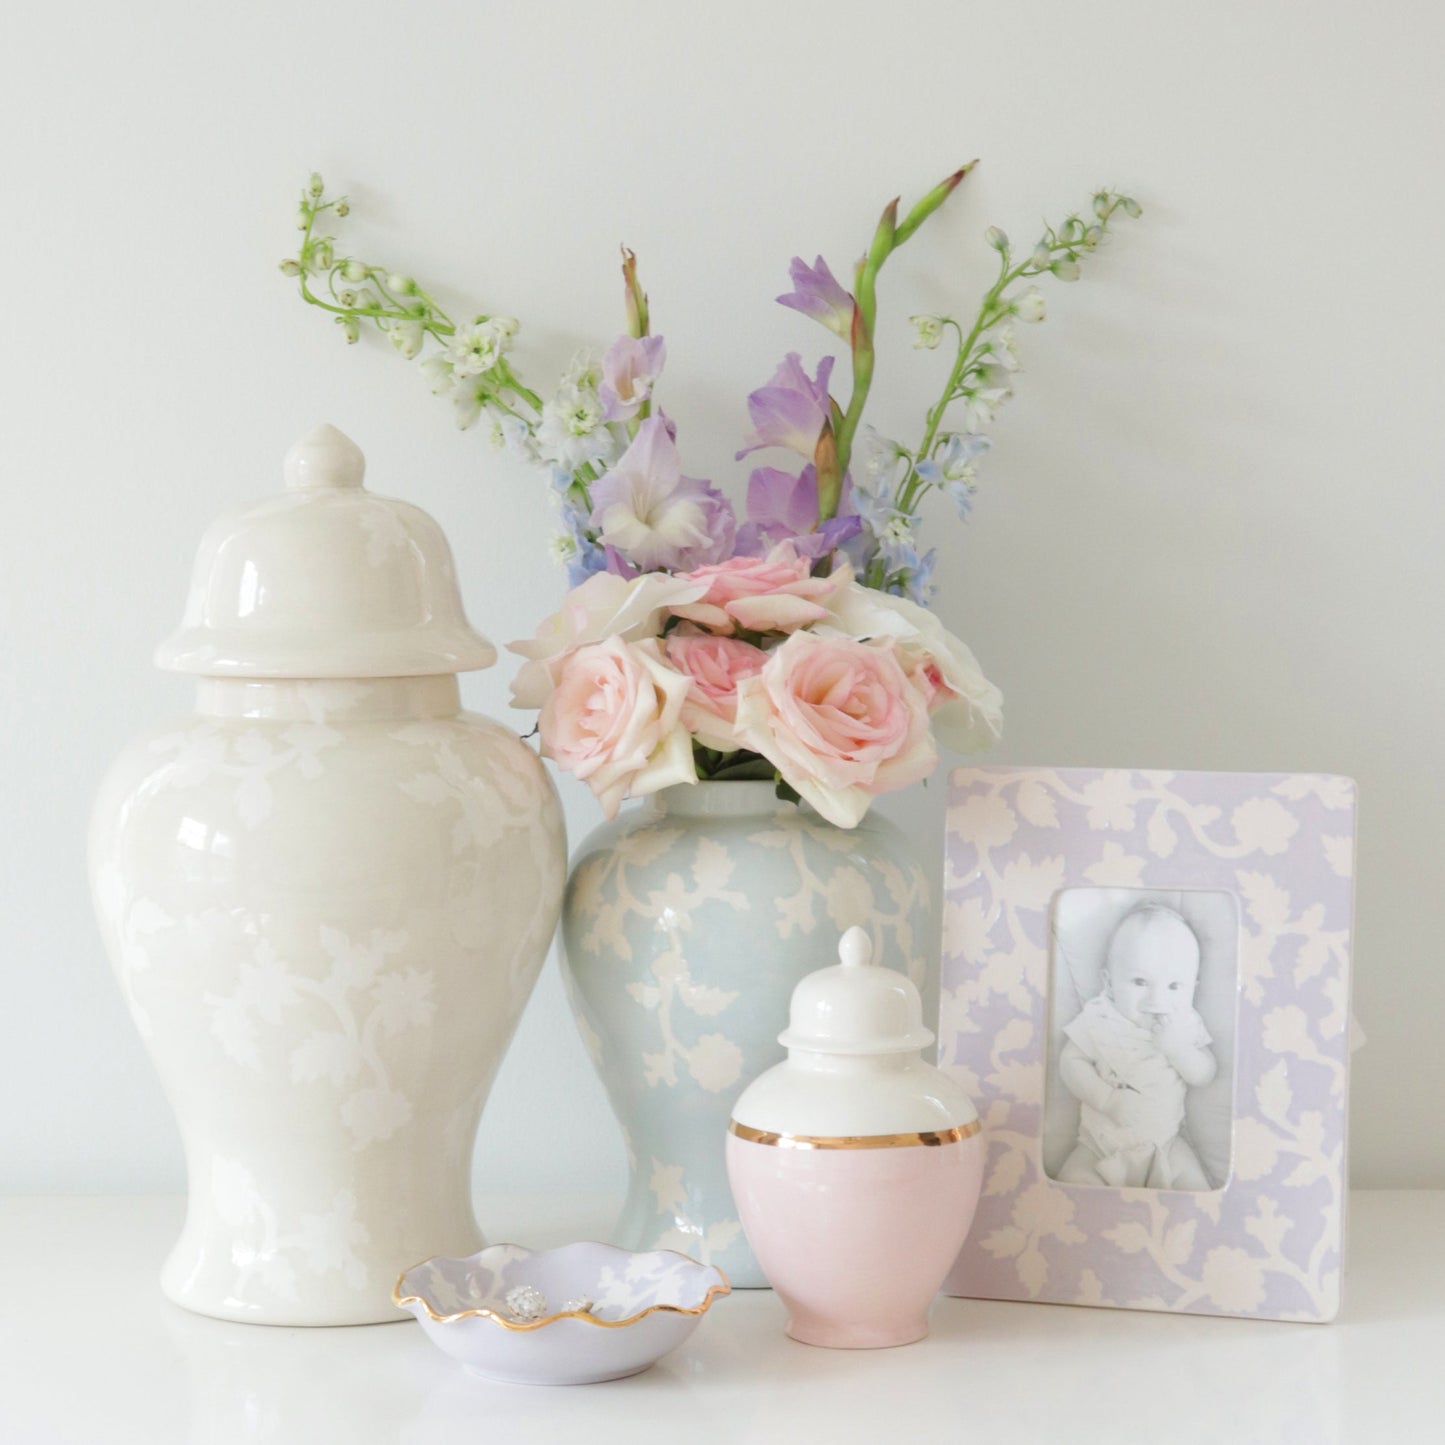 Chinoiserie Dreams Ginger Jars in Hydrangea Light Blue